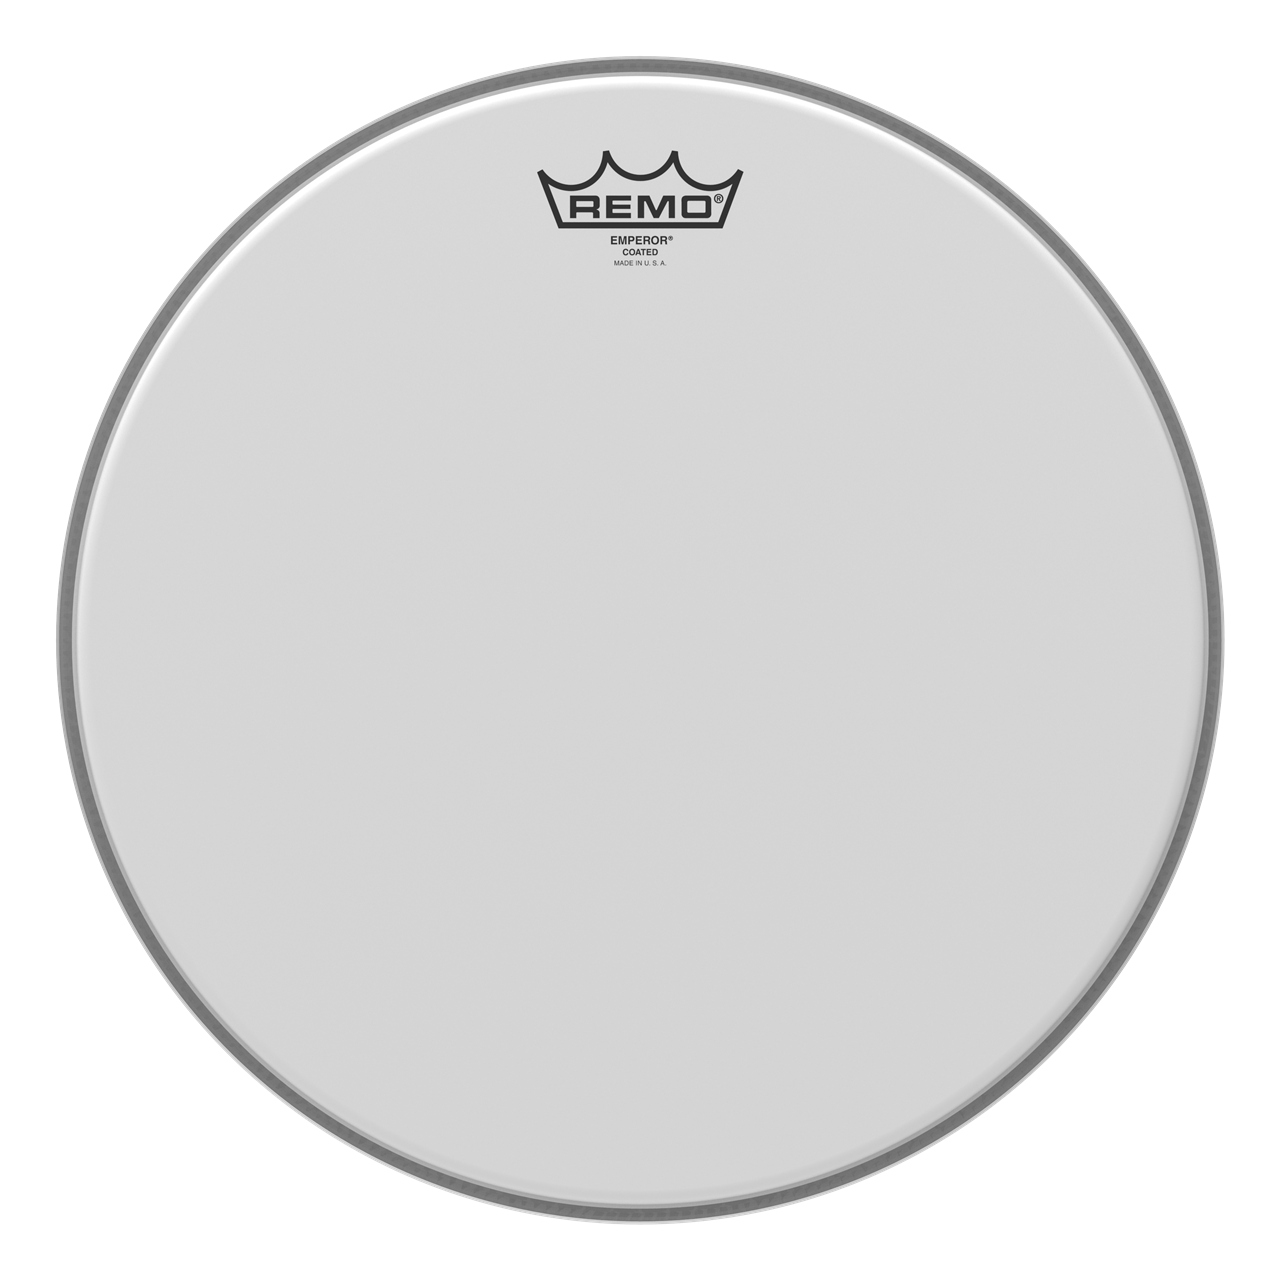 Remo BE-0118-00 Emperor, 18" Coated